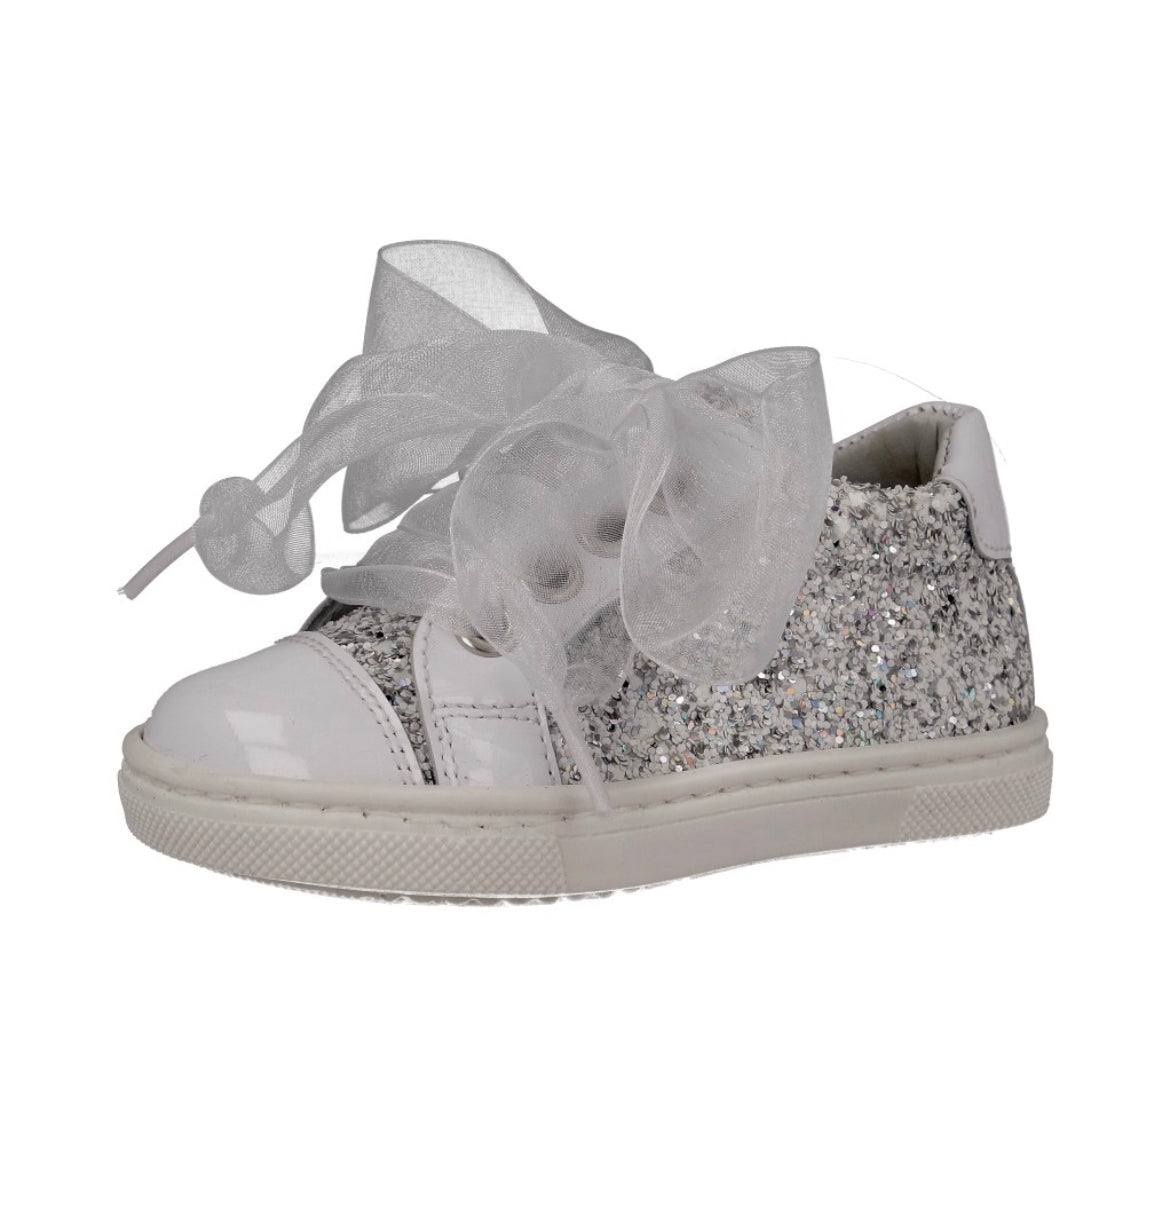 222295 Andanines White Glitter Trainers